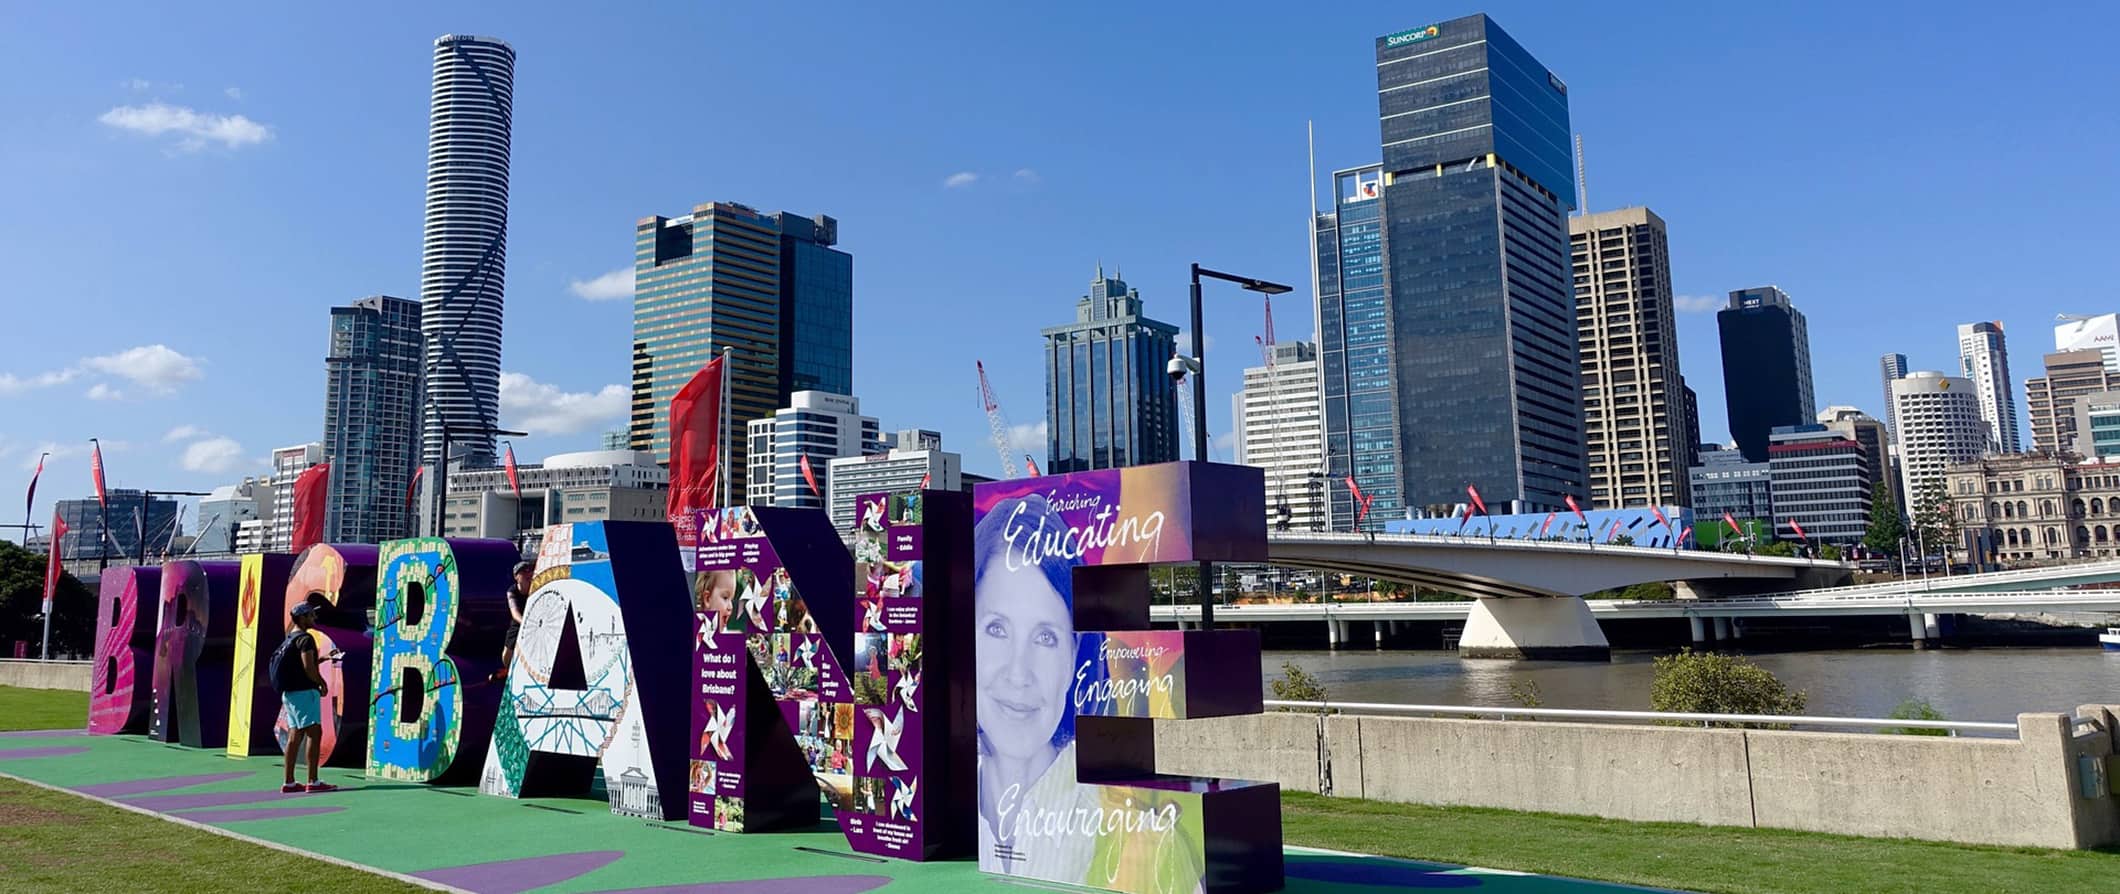 The towering skyline of Brisbane, Australia featuring some cool street art